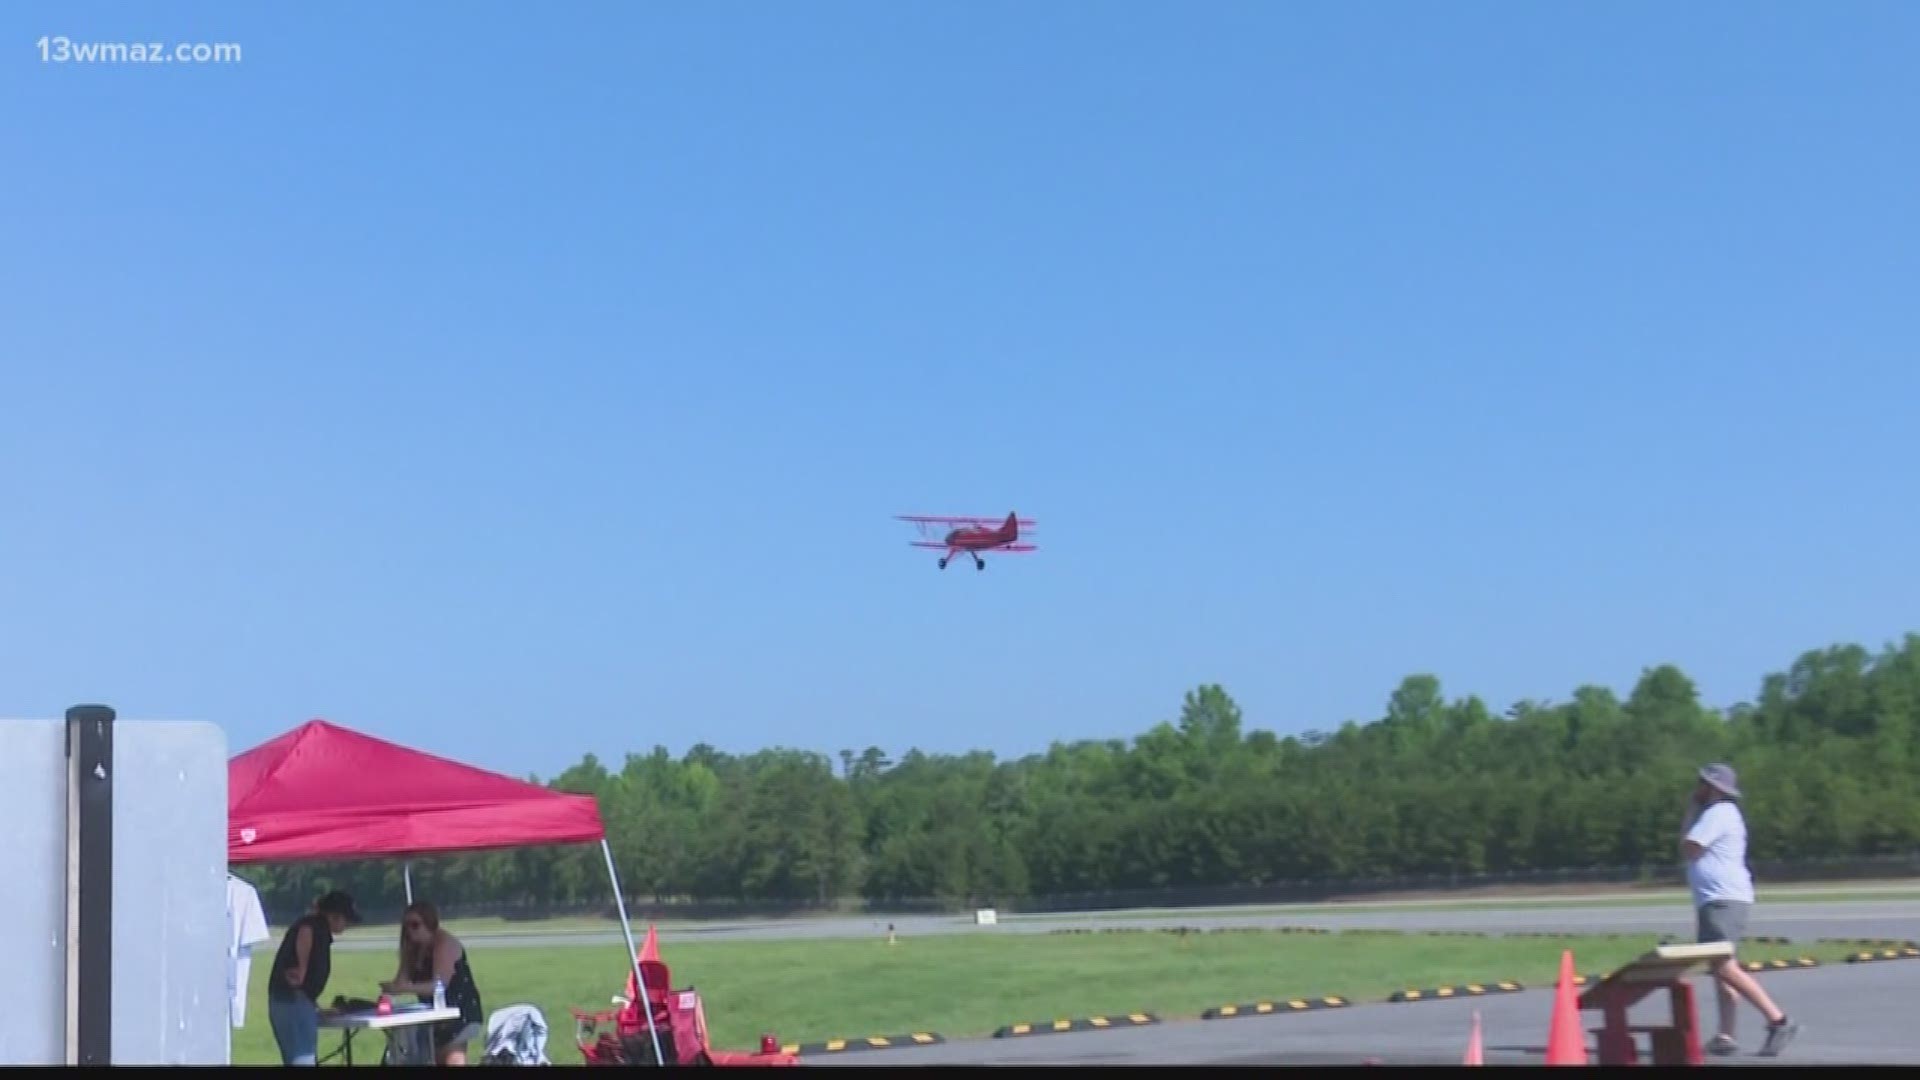 In Baldwin County on Saturday, people took to the sky to celebrate the airport's 60th anniversary. Small plane rides were available to purchase.